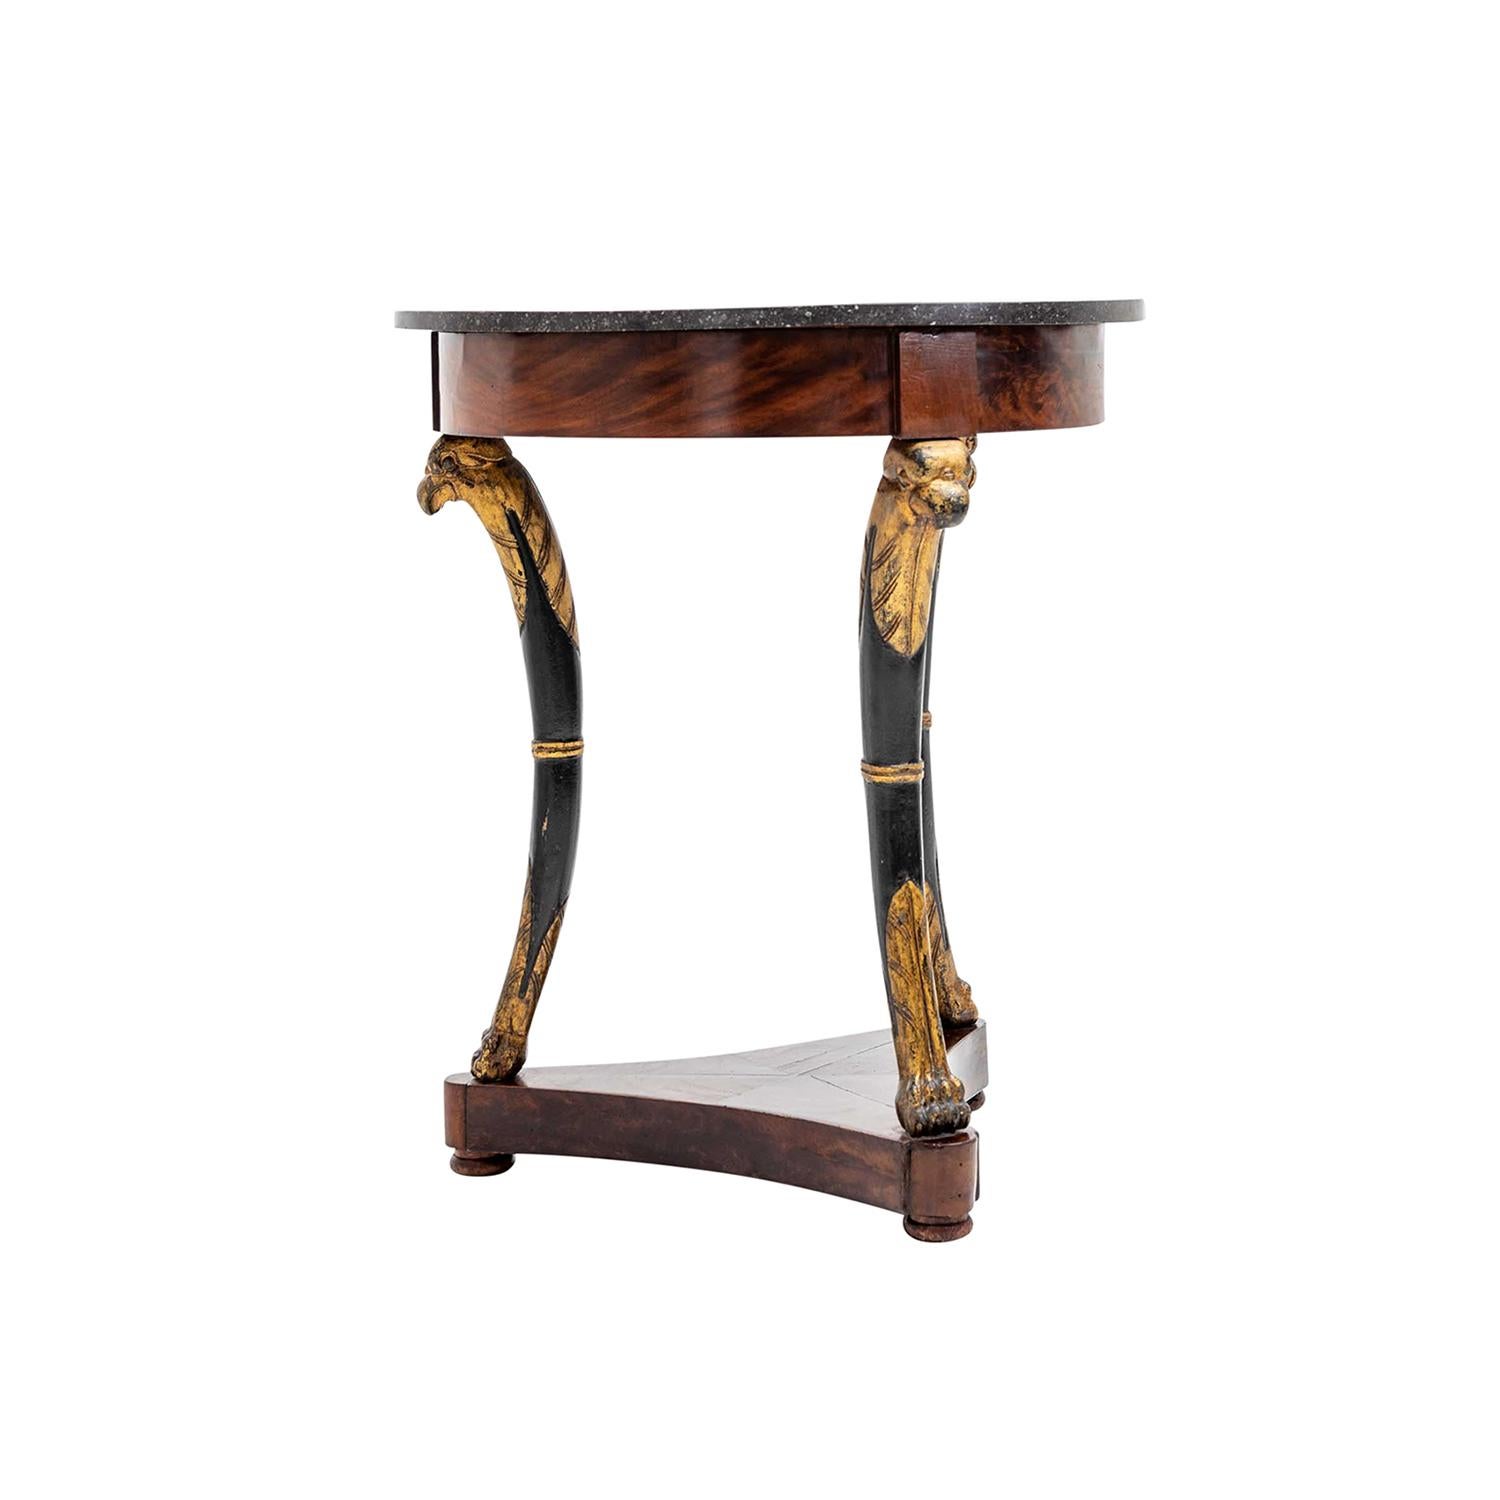 19th Century French Empire Round Mahogany Side Table - Antique Marble Table In Good Condition For Sale In West Palm Beach, FL